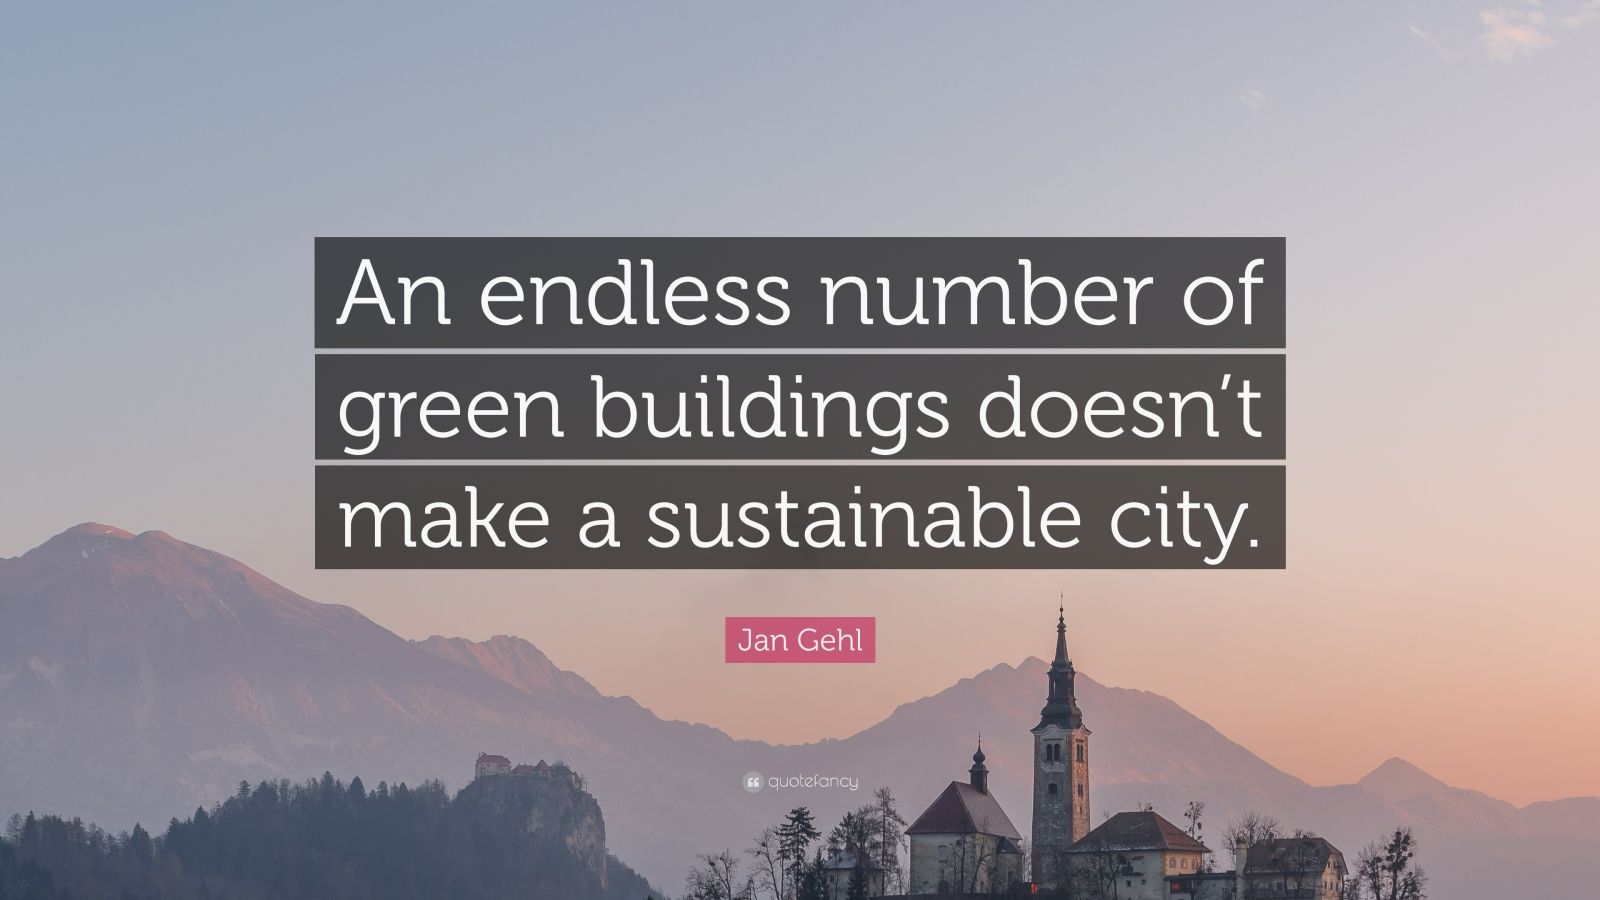 jan-gehl-quote-an-endless-number-of-green-buildings-doesn-t-make-a-sustainable-city-7